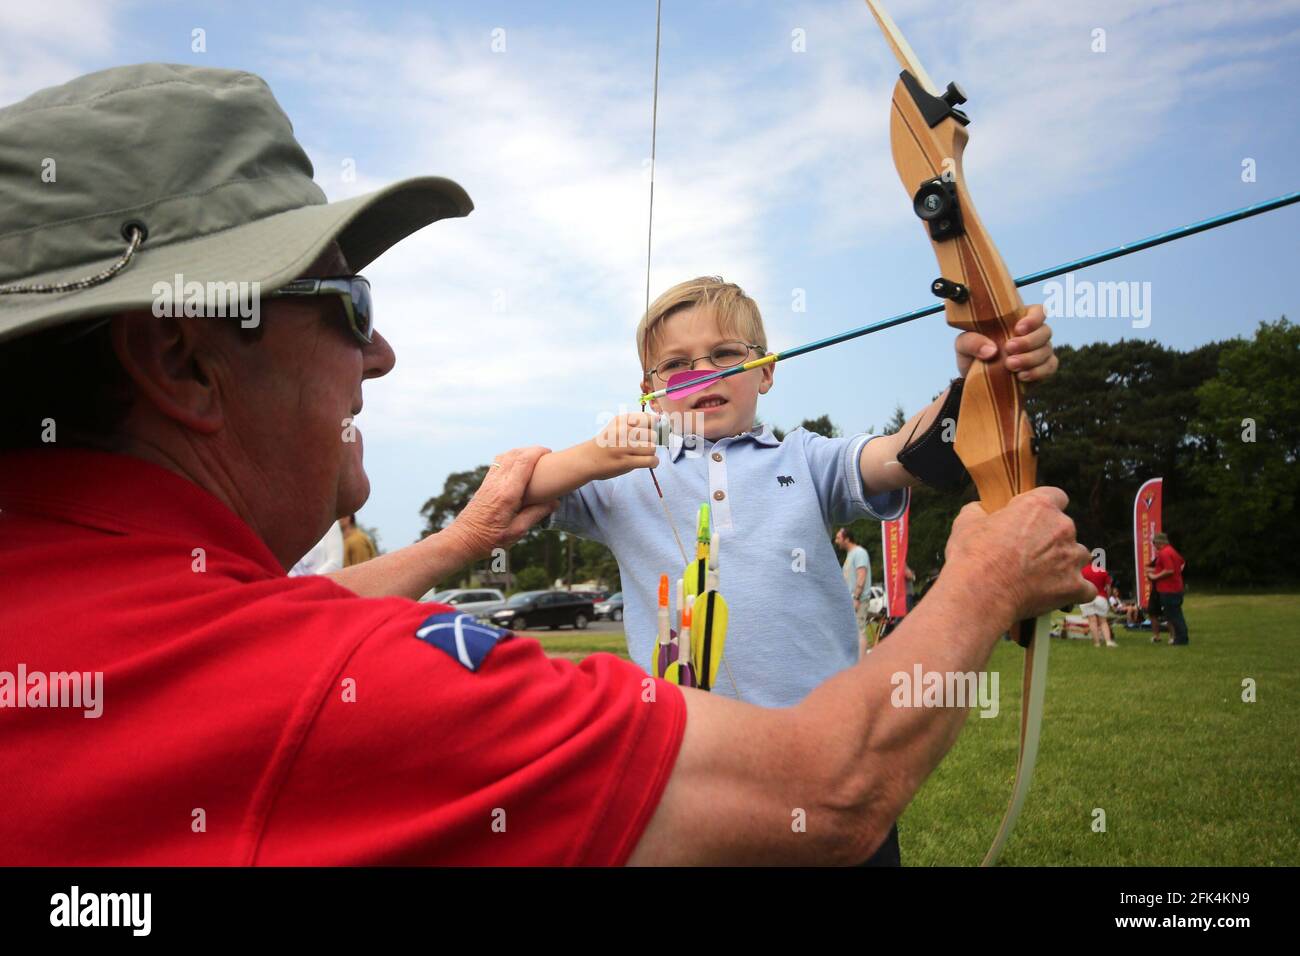 Ayr Archery Club held an open day 'Come and try Archery ' at the J.Mowatt playing fields Doonside, Ayr 5yr old Lewis Flynn receives instruction from Willie Roney Stock Photo